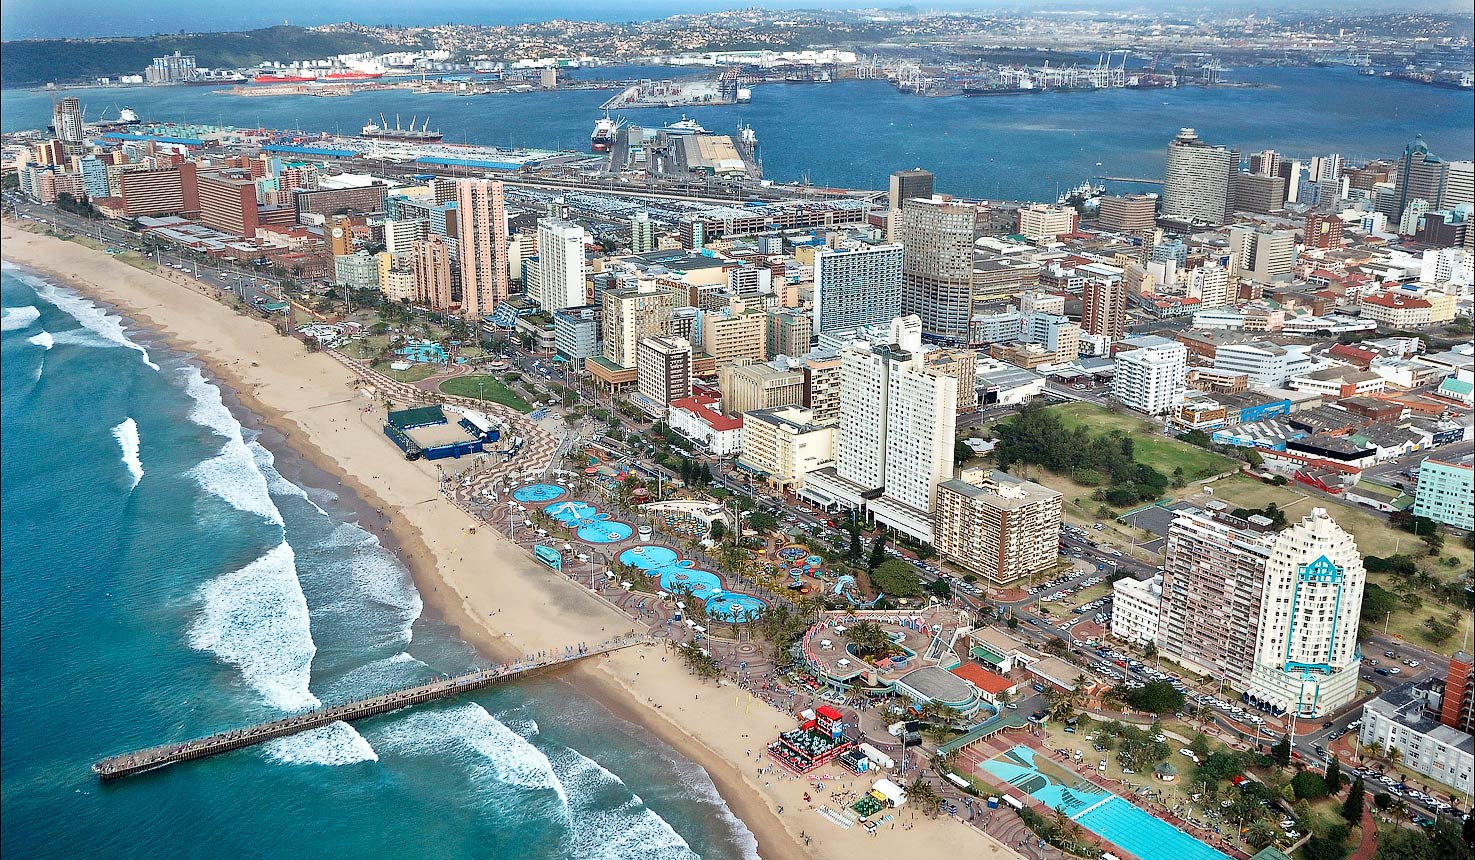 Durban will gain valuable experience from hosting the 2022 Commonwealth Games, which could be used to launch a bid for the Olympics and Paralympics predicts Confederation of African Athletics President Hamad Kalkaba Malboum ©Getty Images